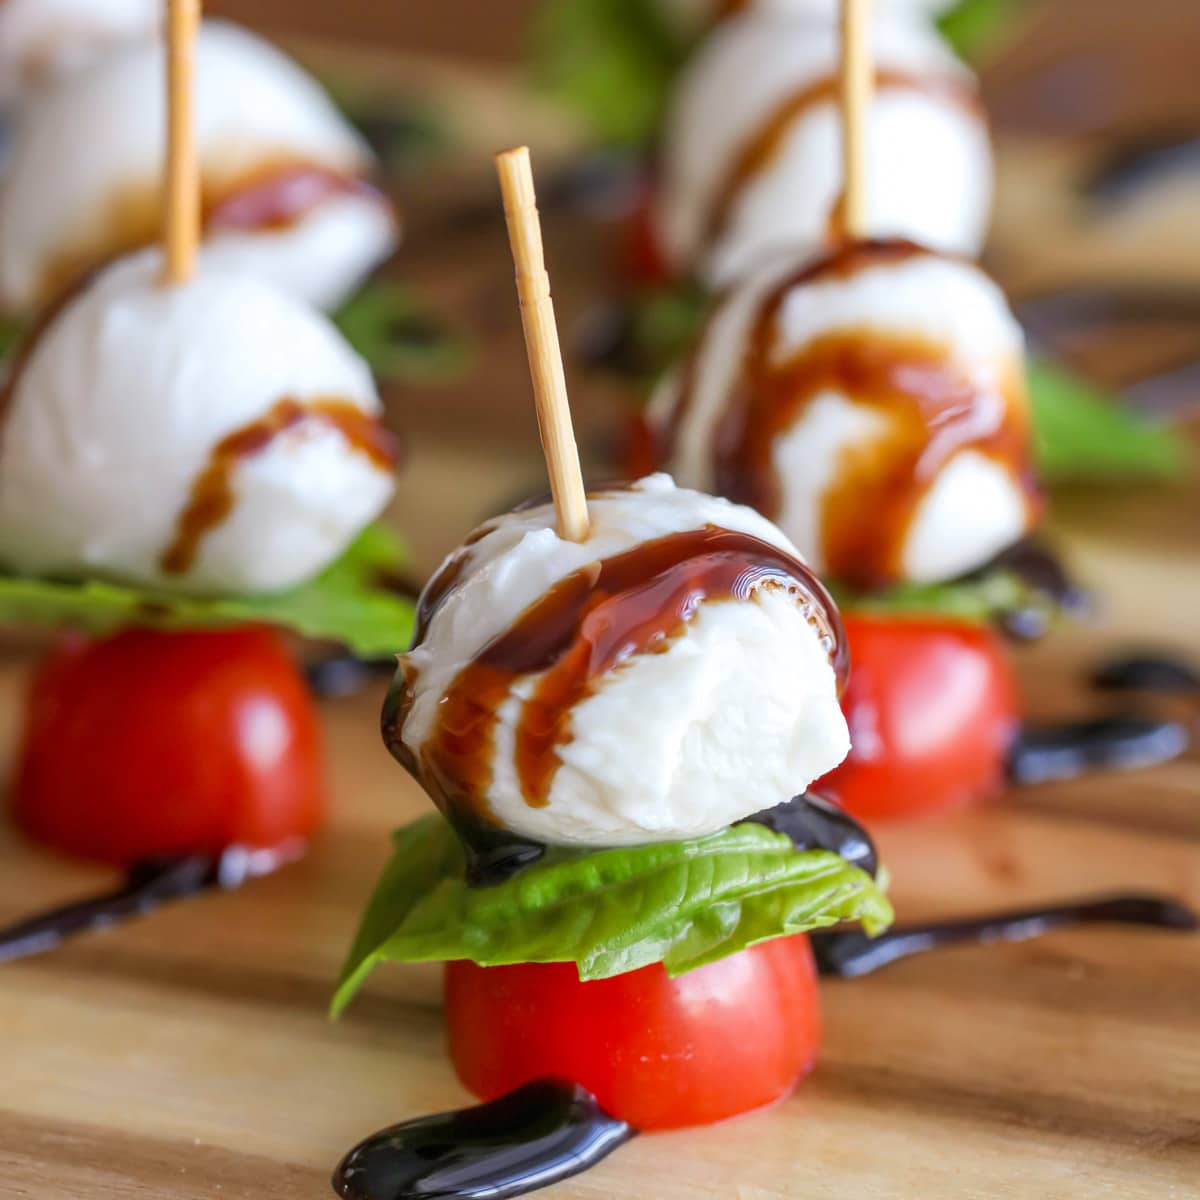 Italian Appetizers - Caprese kabobs drizzled with balsamic vinegar.